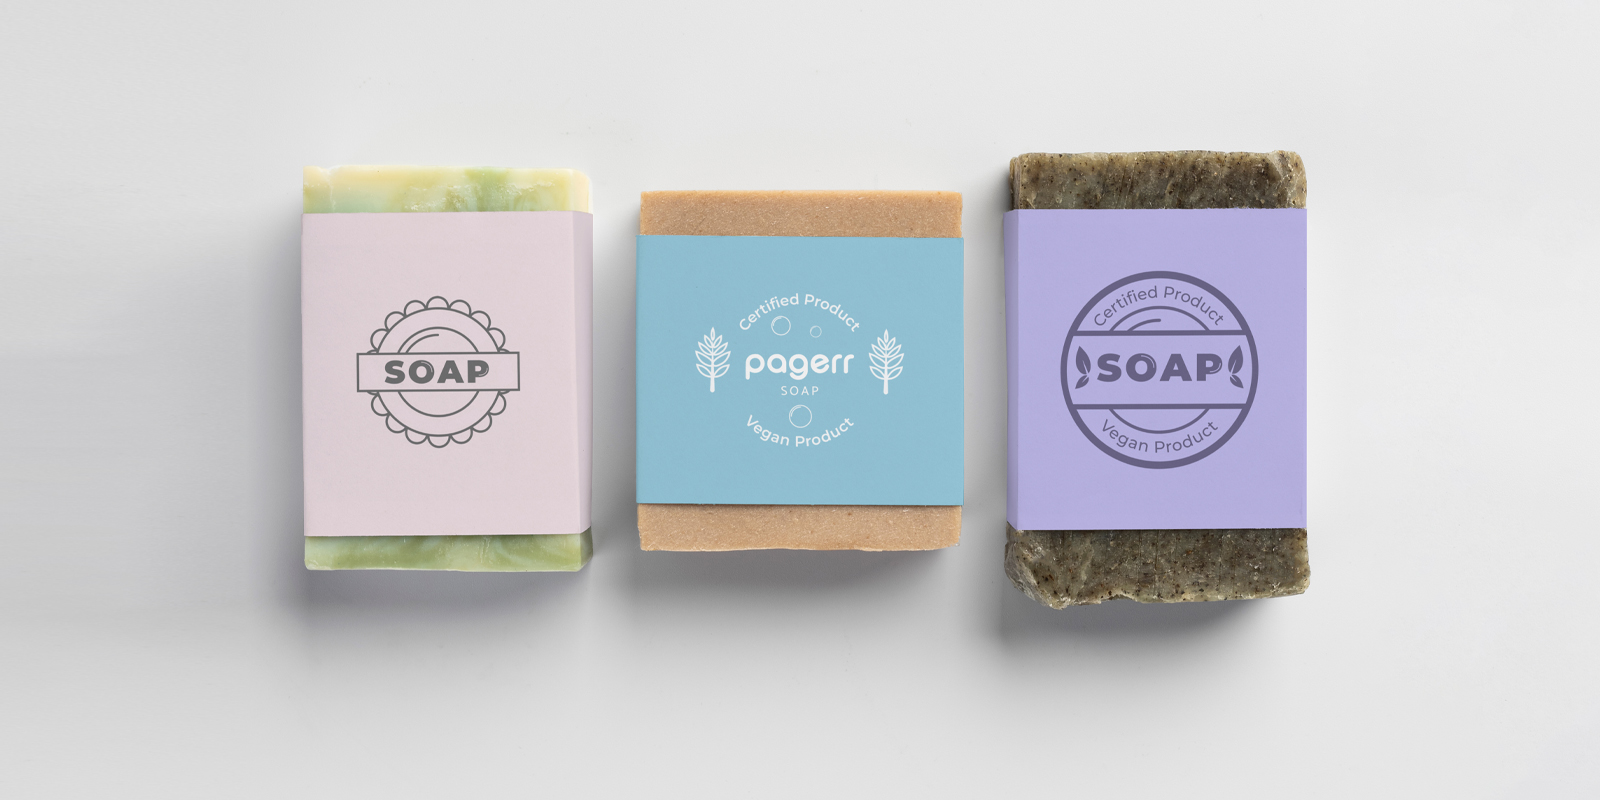 Soap labels in Barcelona - Print with Pagerr